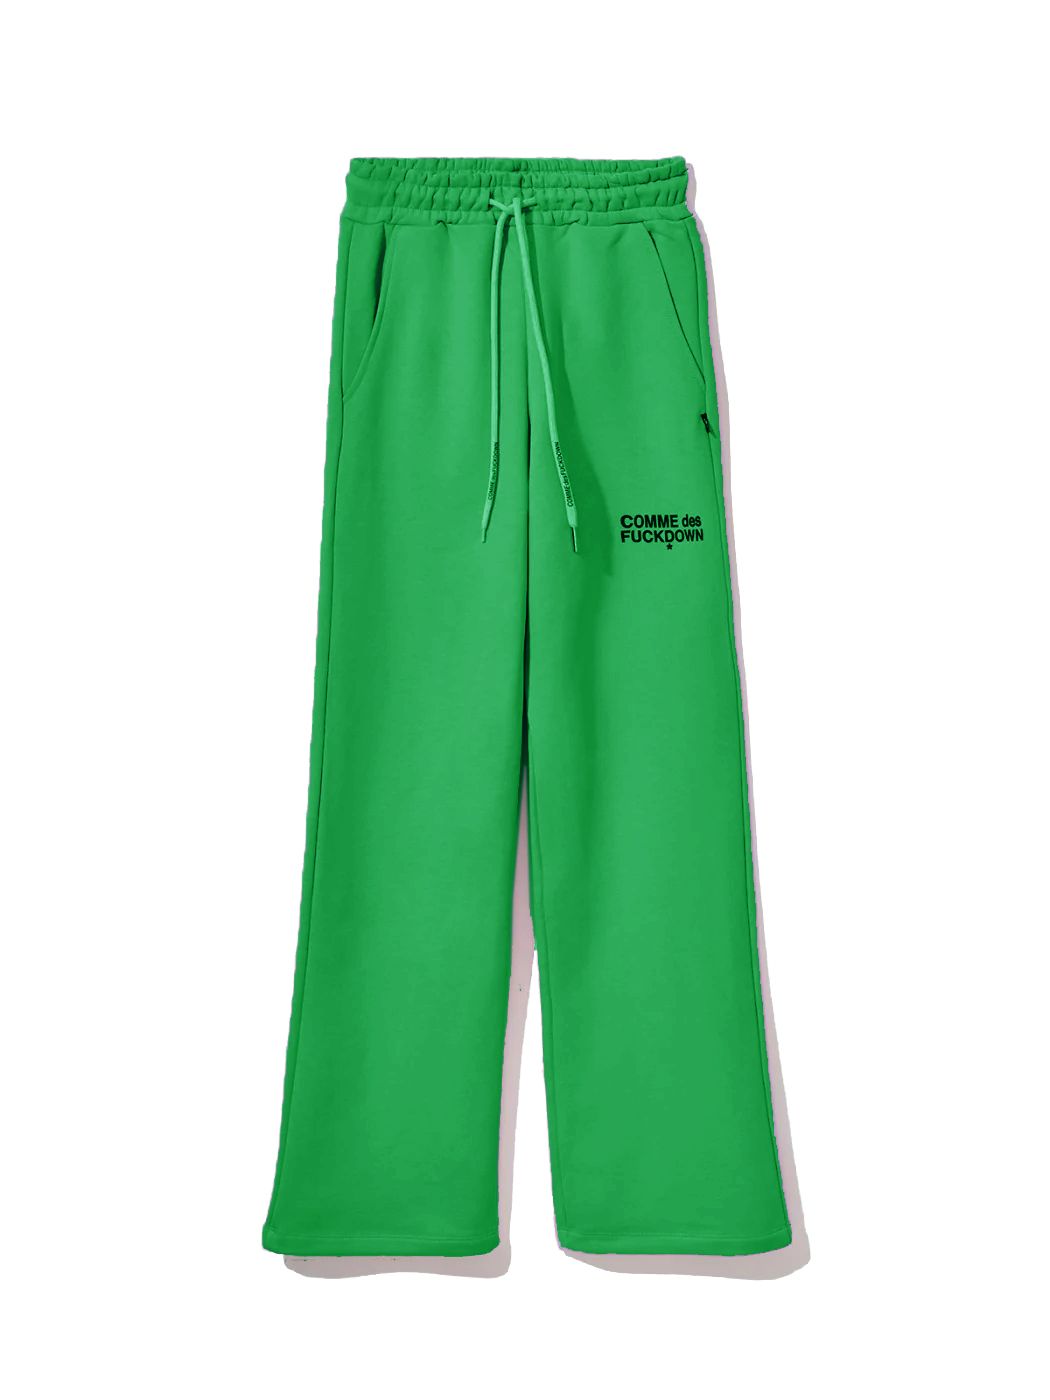 Comme Des Fuckdown Elevated Green Palazzo Sweatpants